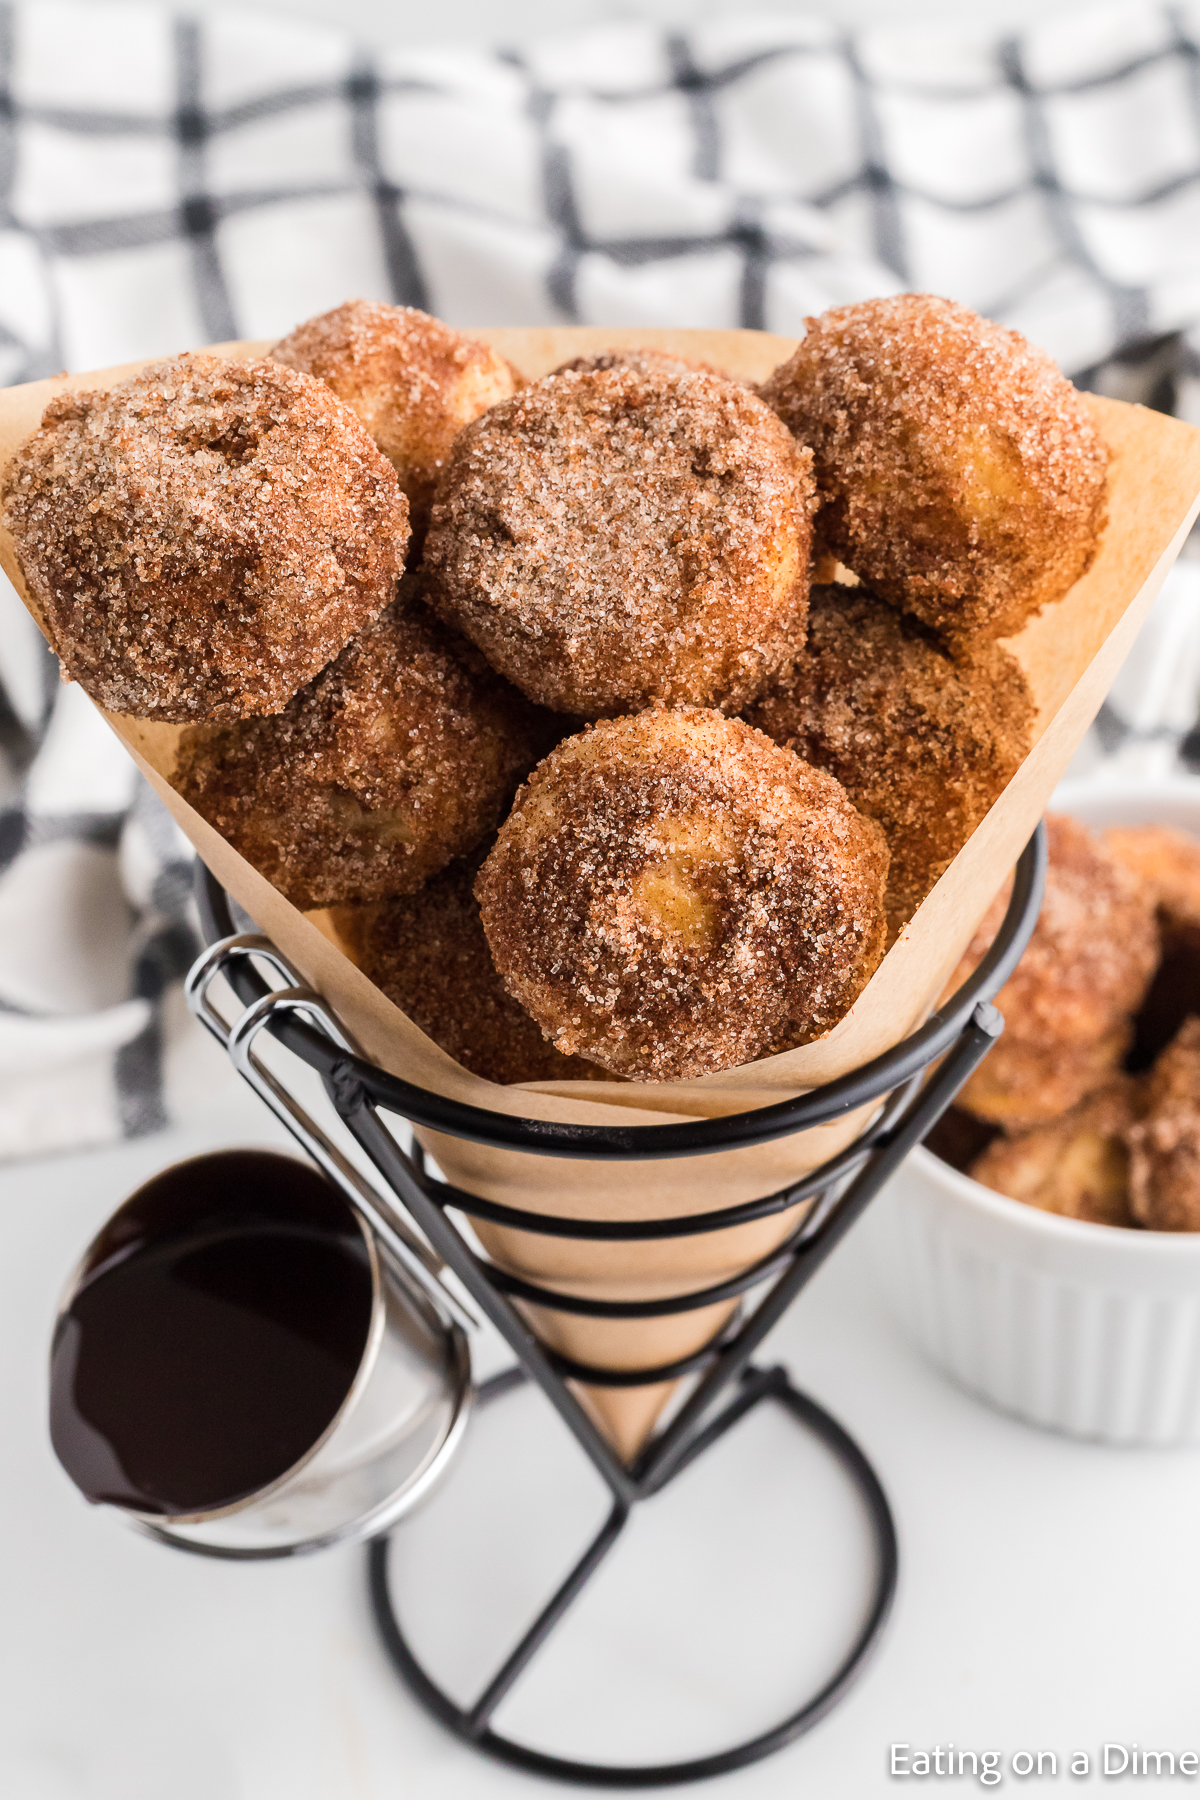 Cinnamon Sugar Donut Holes in a stand with a side of dipping sauce